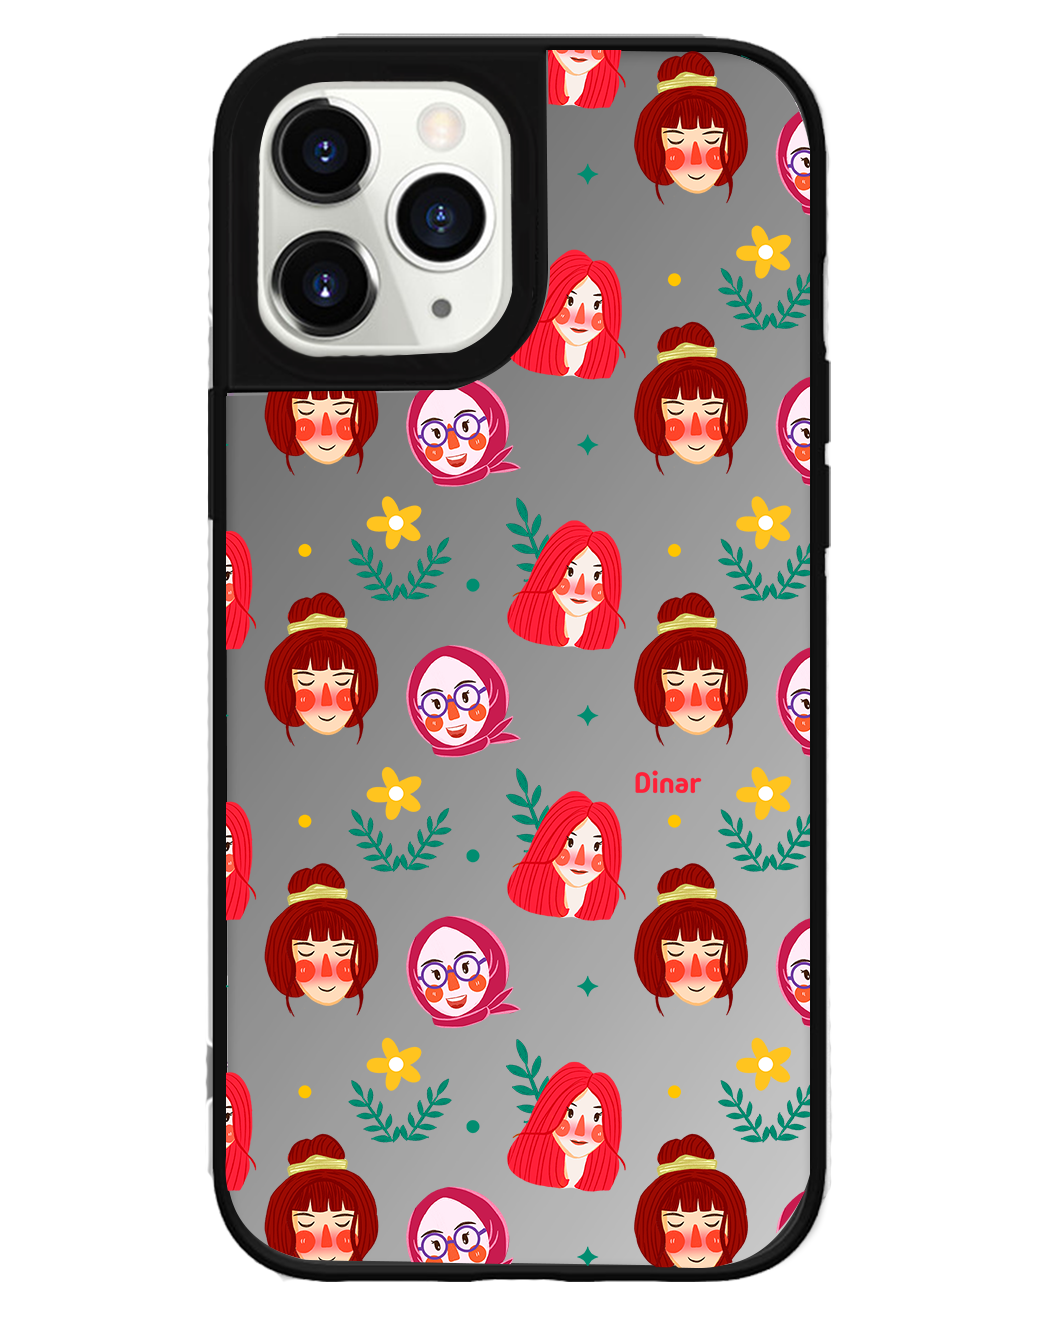 iPhone Mirror Grip Case - Lovely Faces